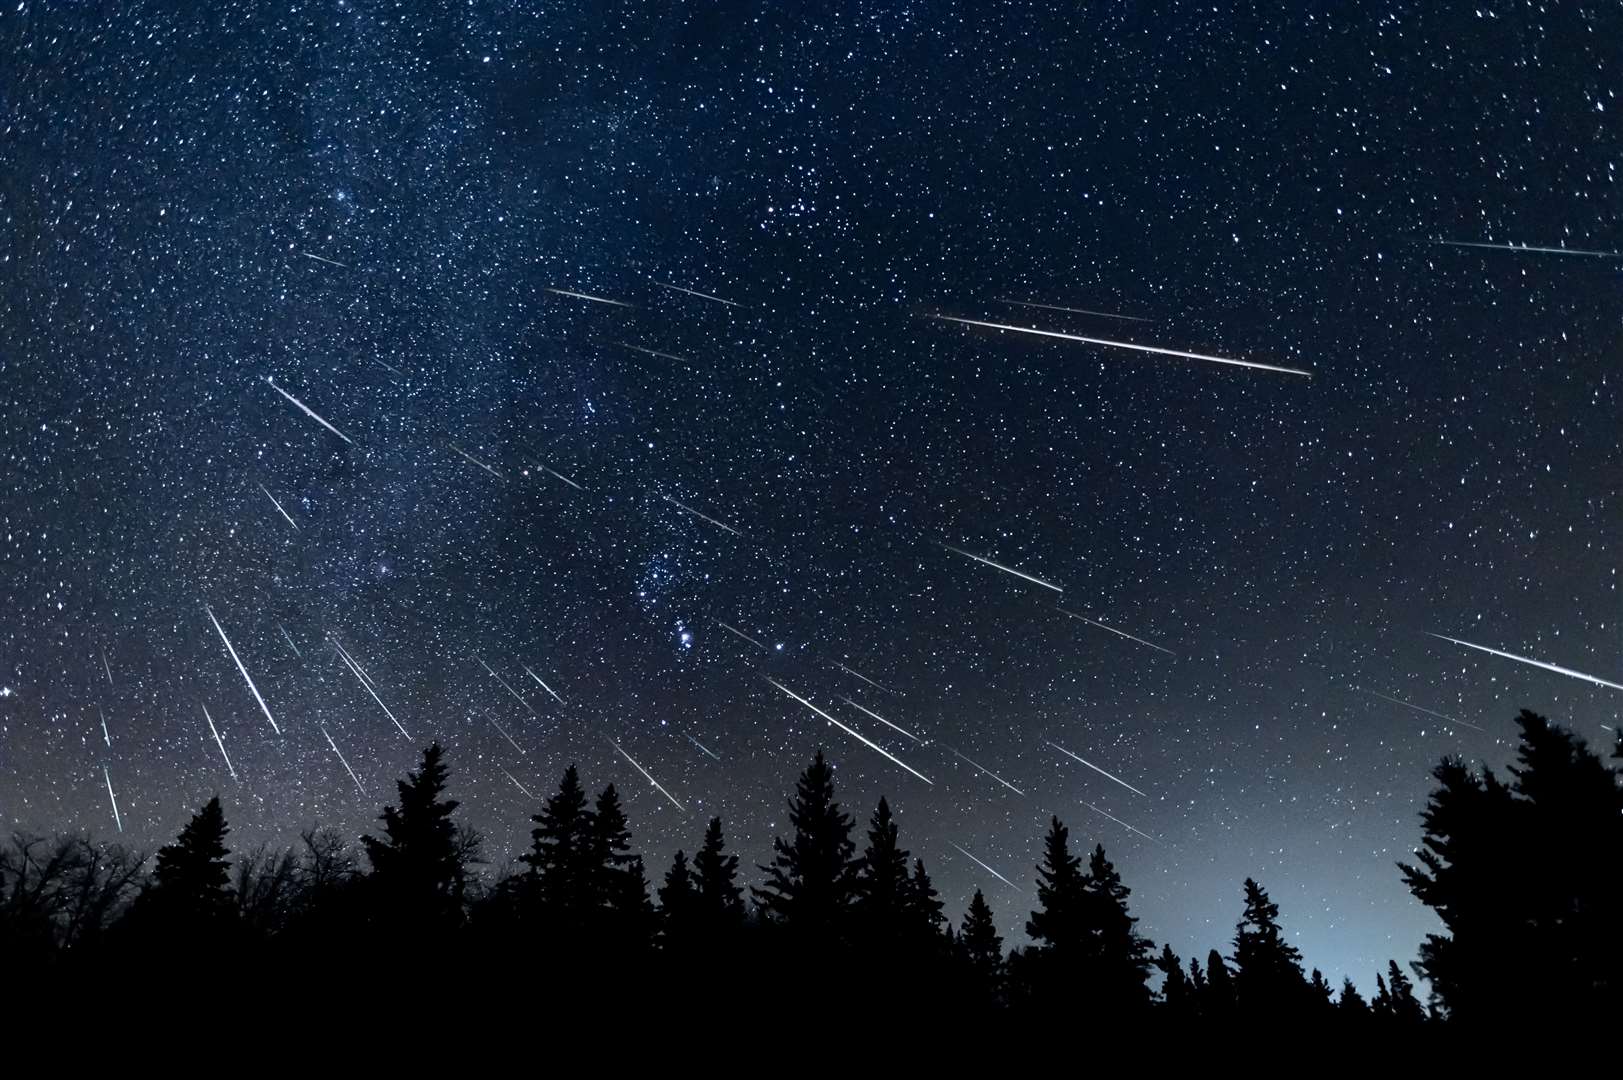 With the right conditions it’s one of the best meteor showers of the year. Image: Adobe stock image.